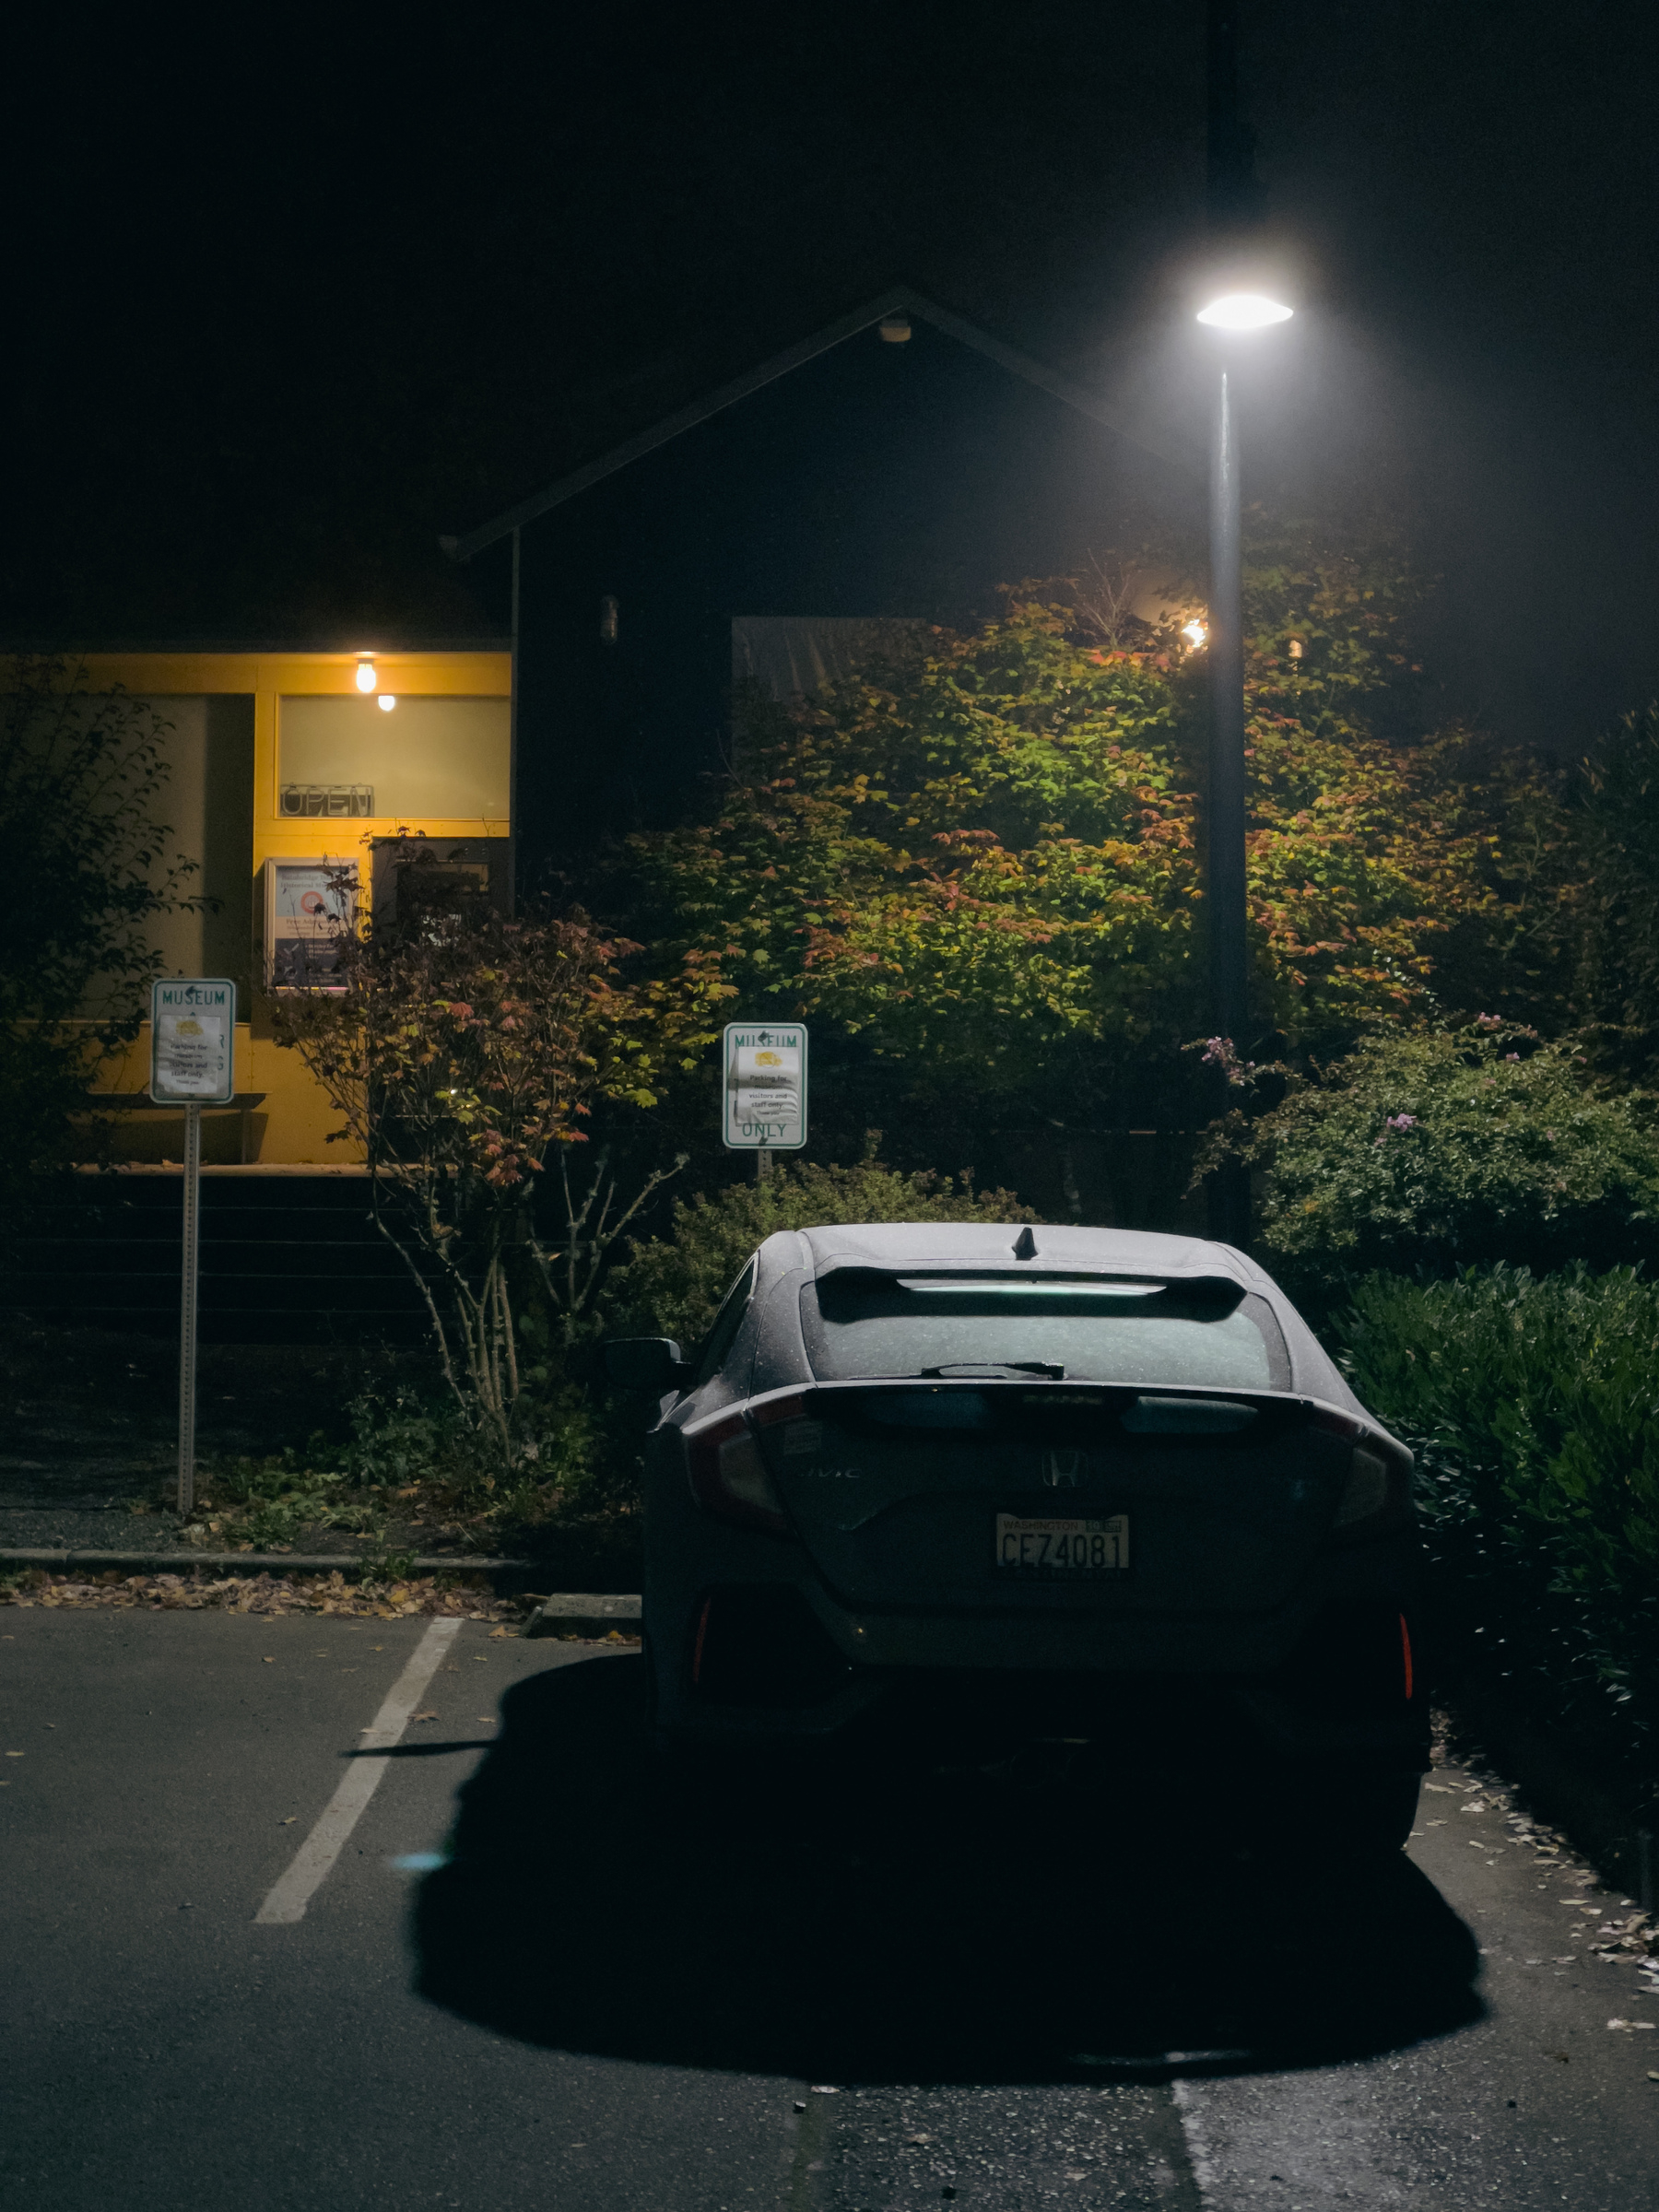 Car, streetlight and rear of building at night.